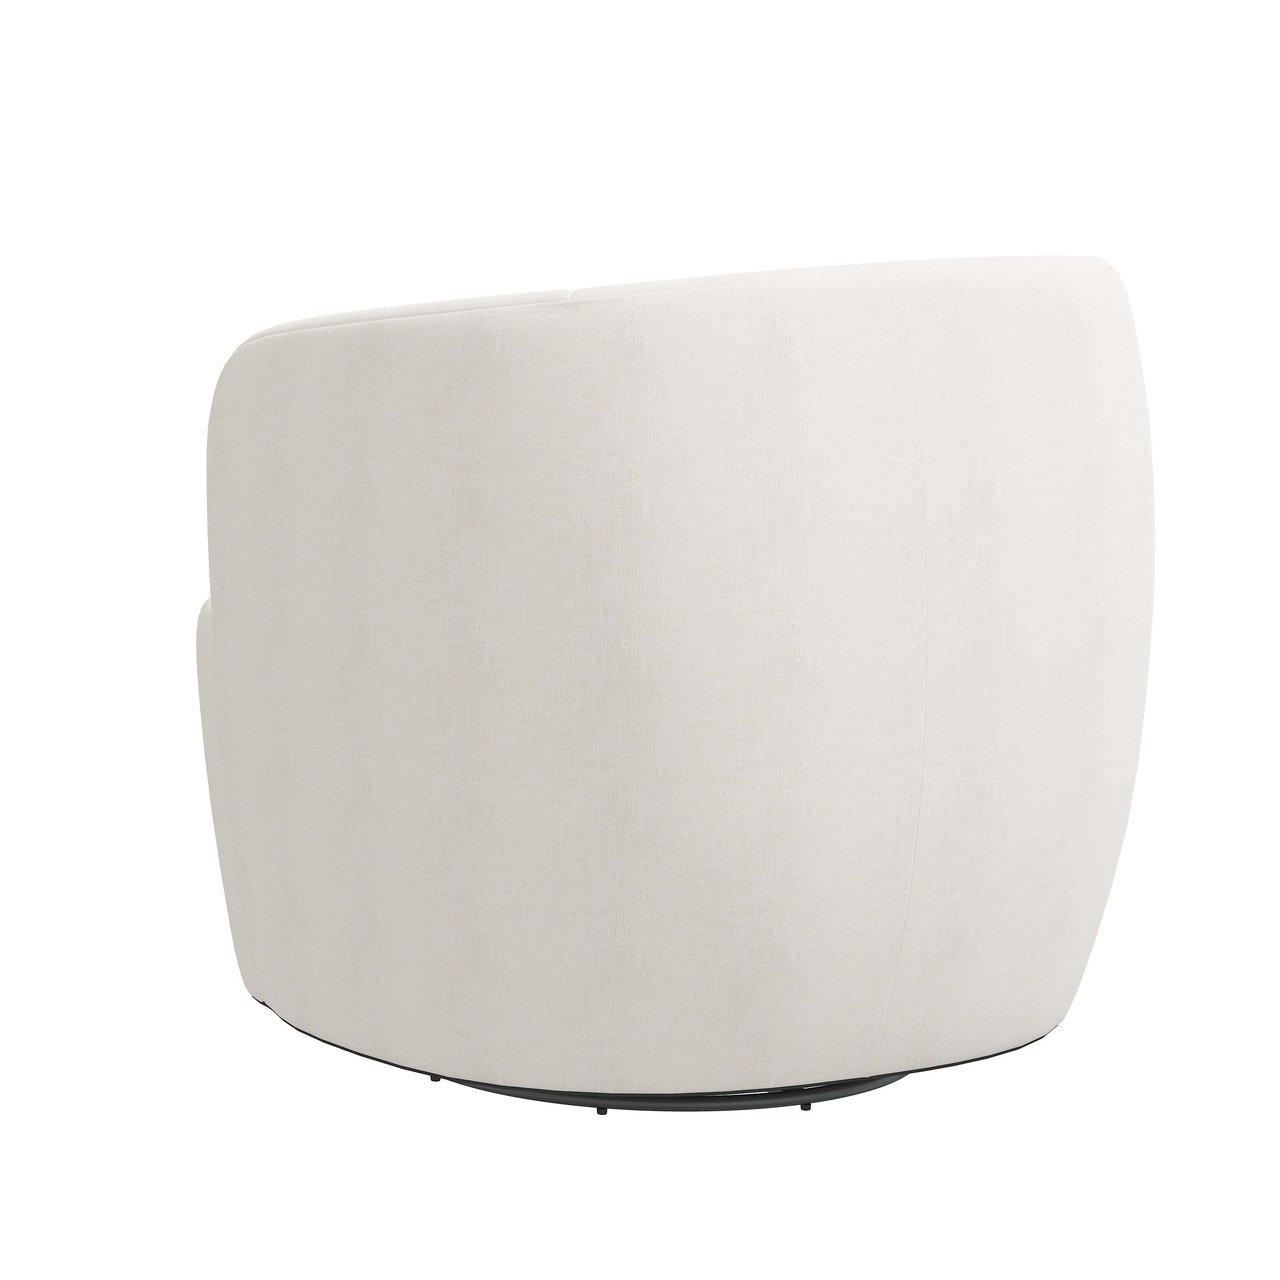 Collette Swivel Chair - Image 3